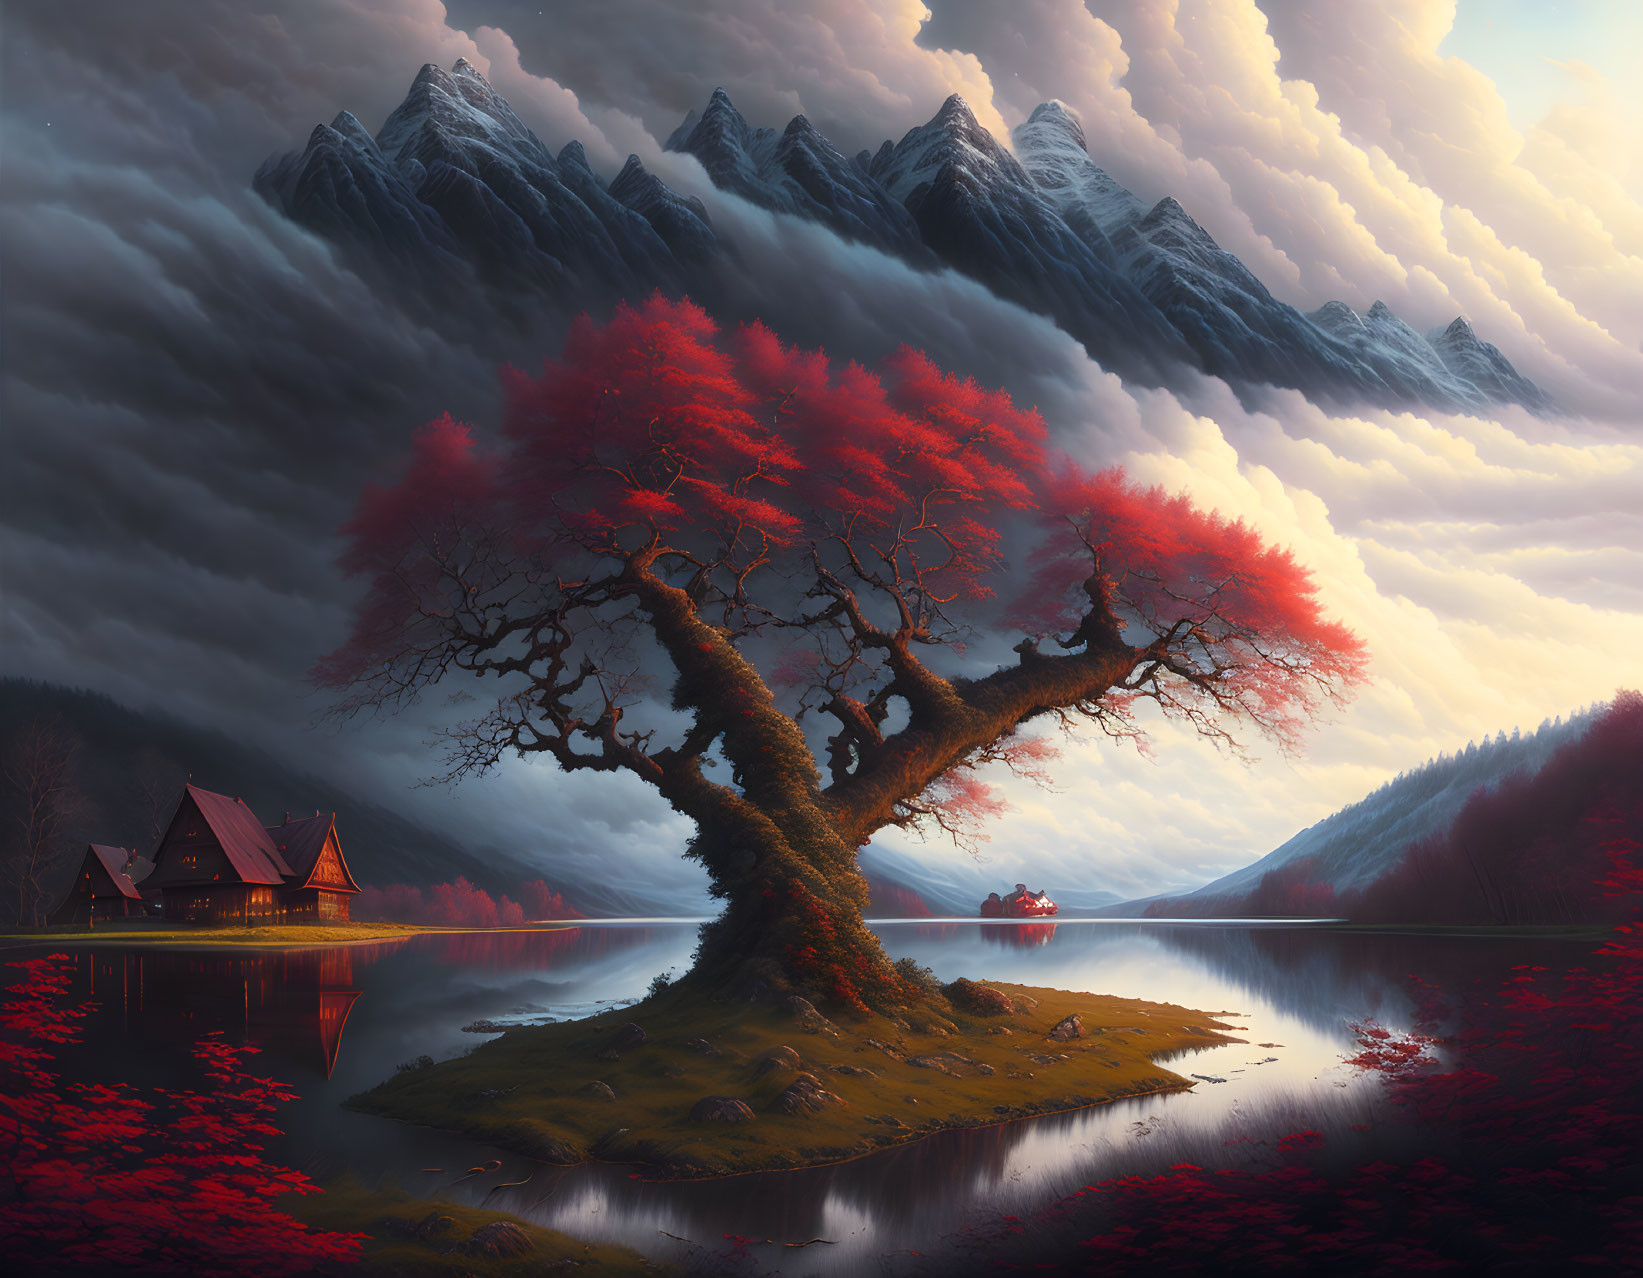 In the land of the red tree